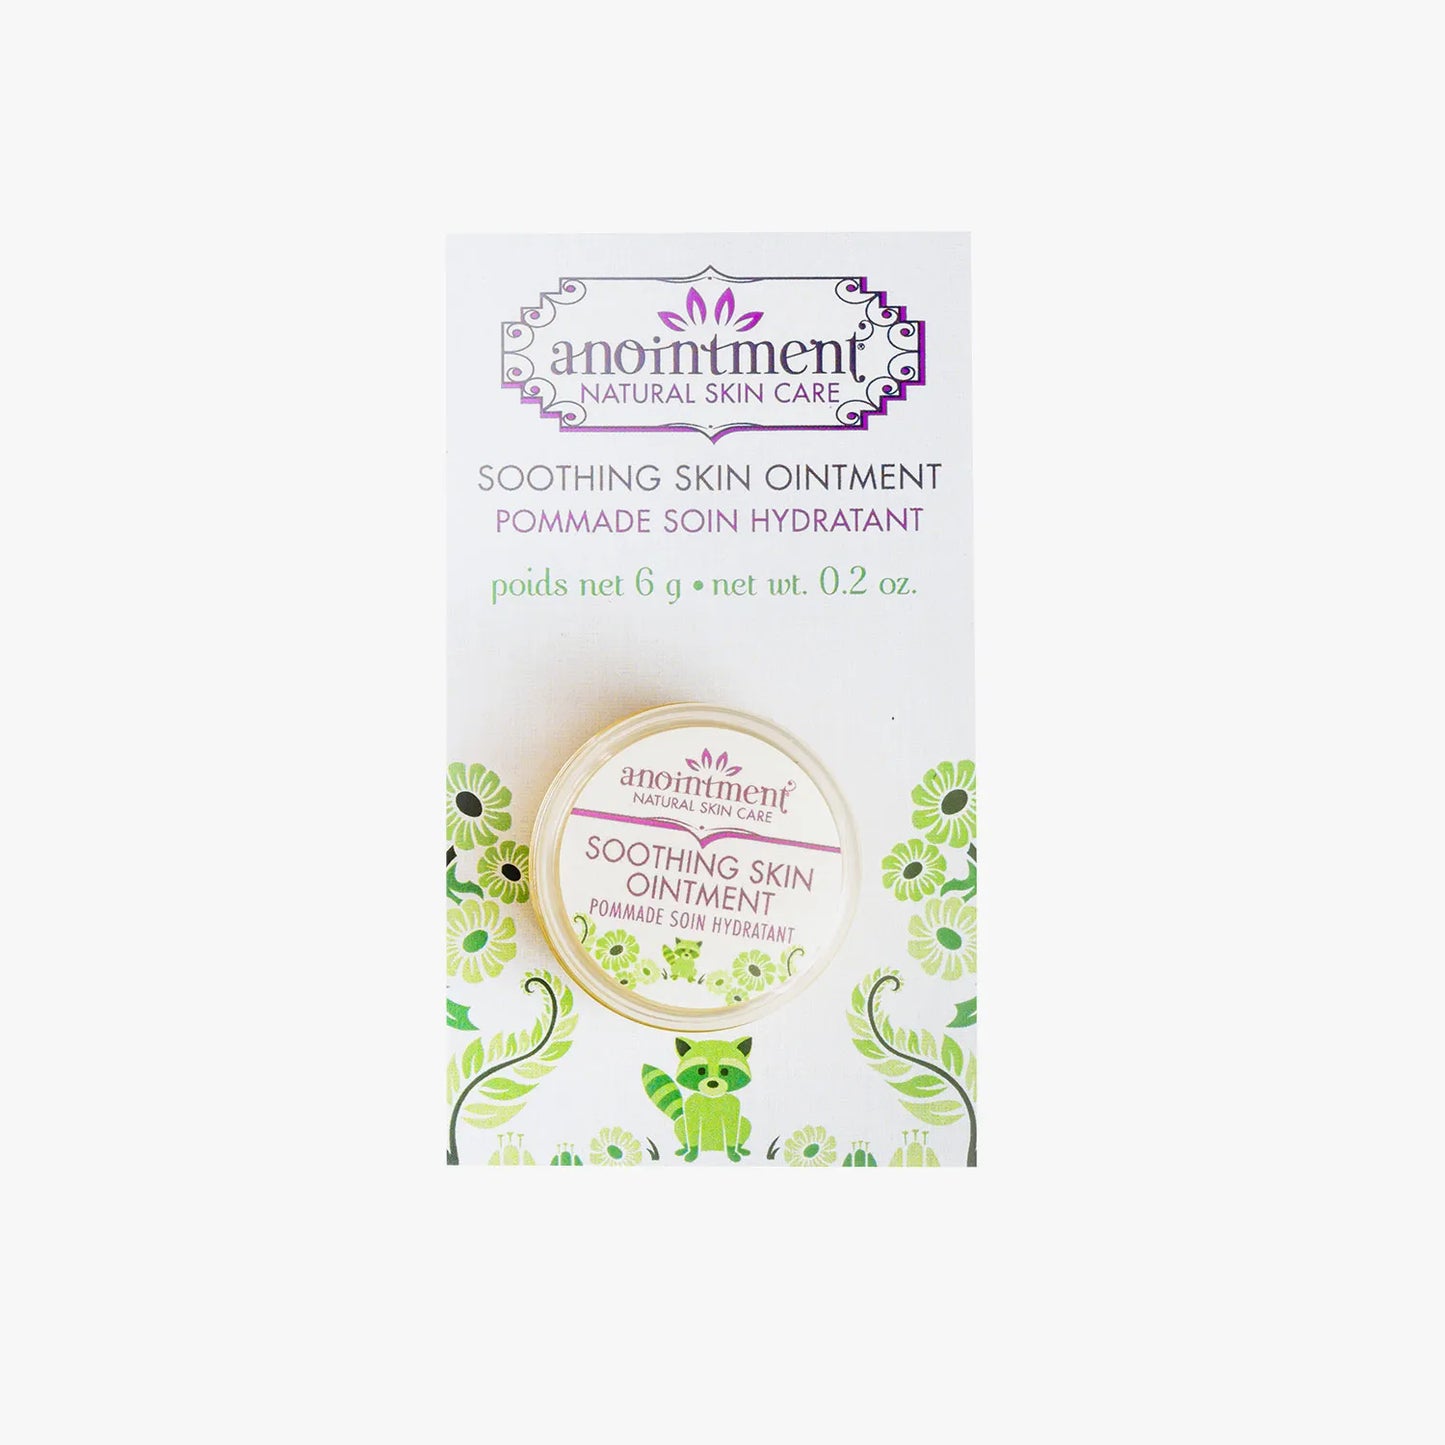 ANOINTMENT Soothing Skin Ointment